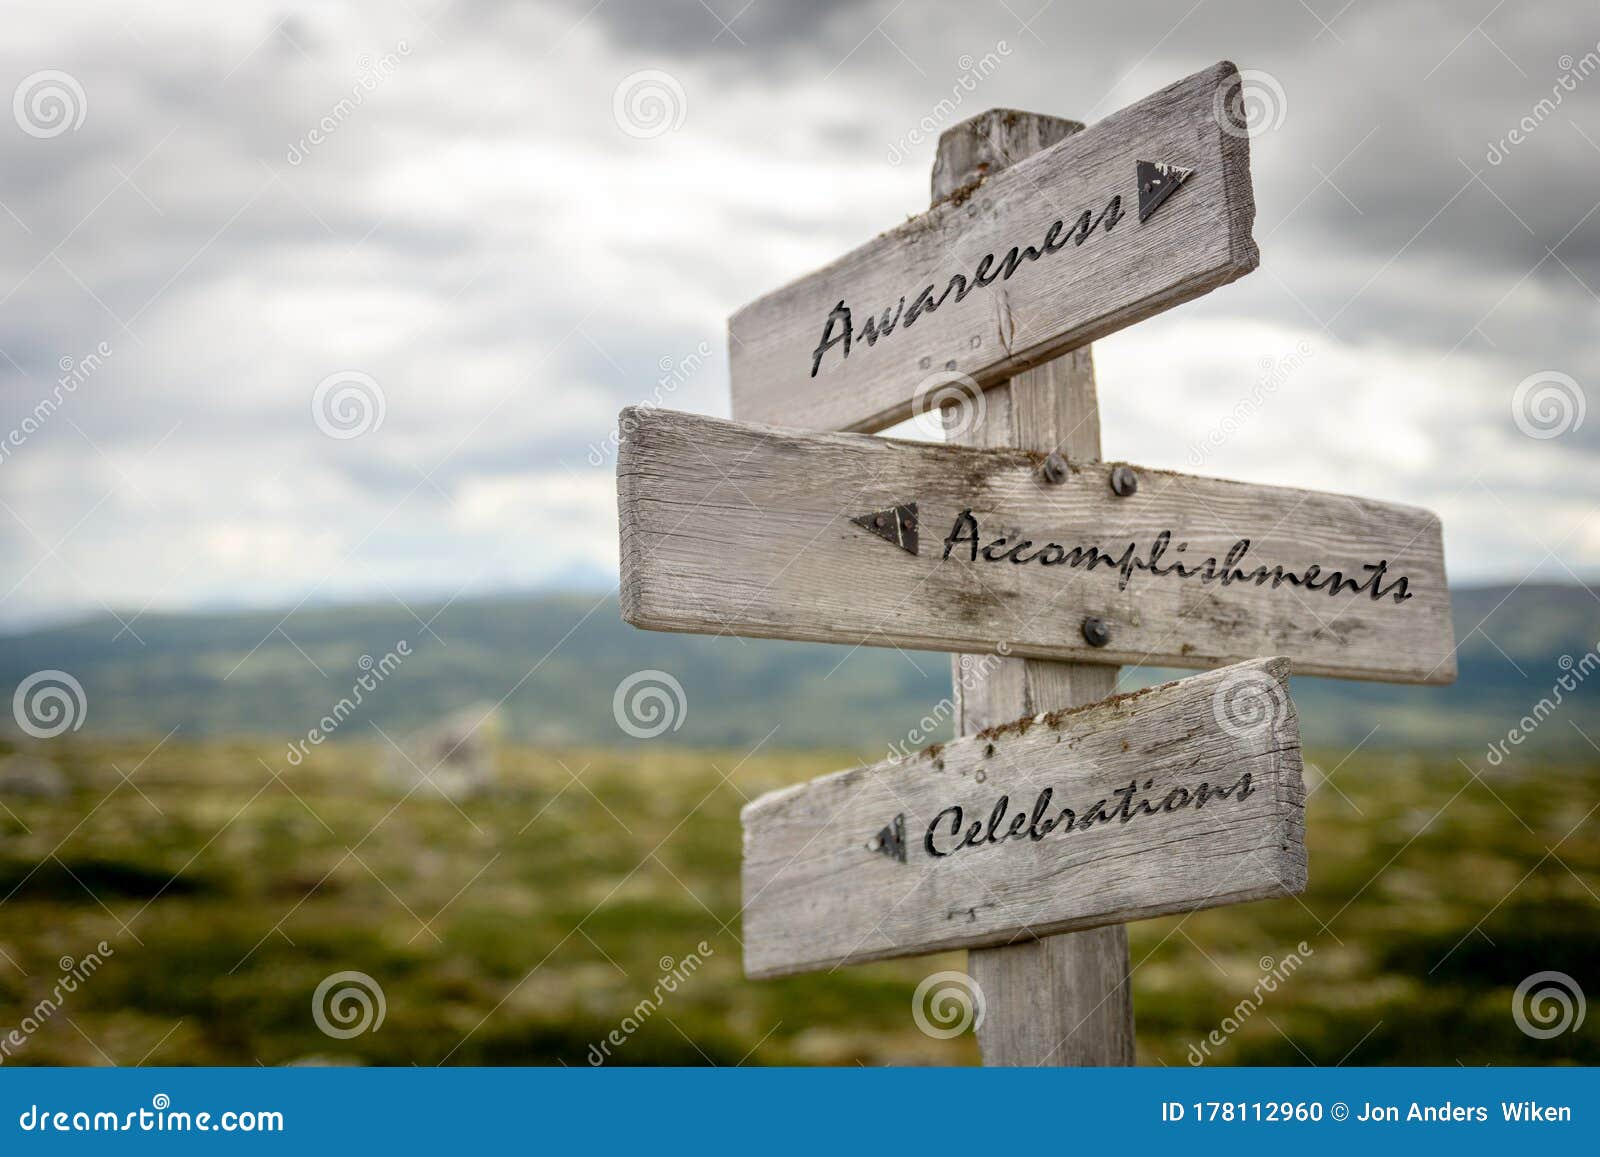 awarness, accomplishments and celebrations text on wooden signpost outdoors in nature.